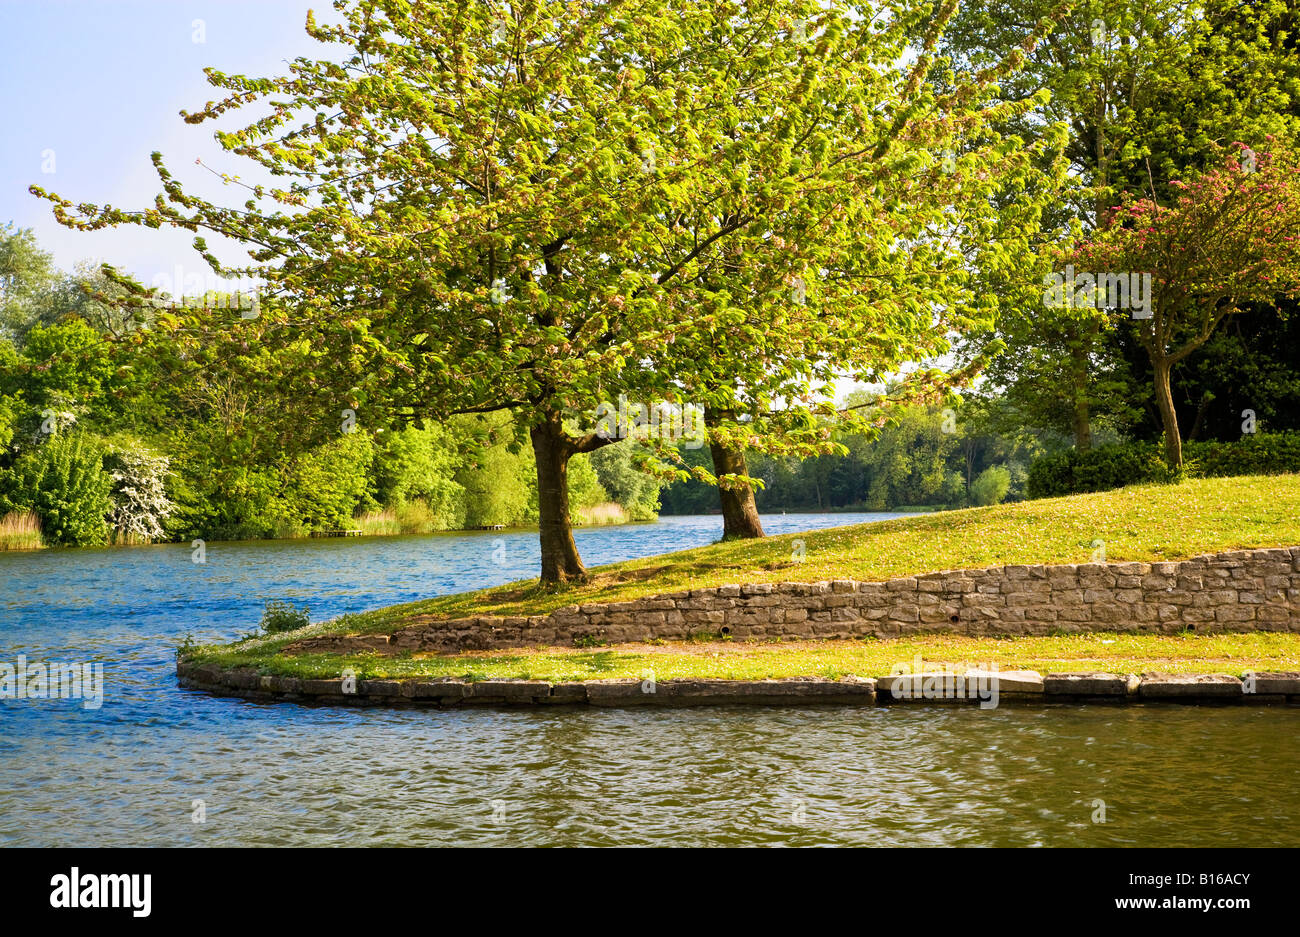 The lake on a sunny day in summer at Coate Water Country Park, a local nature reserve near Swindon, Wiltshire, England, UK Stock Photo